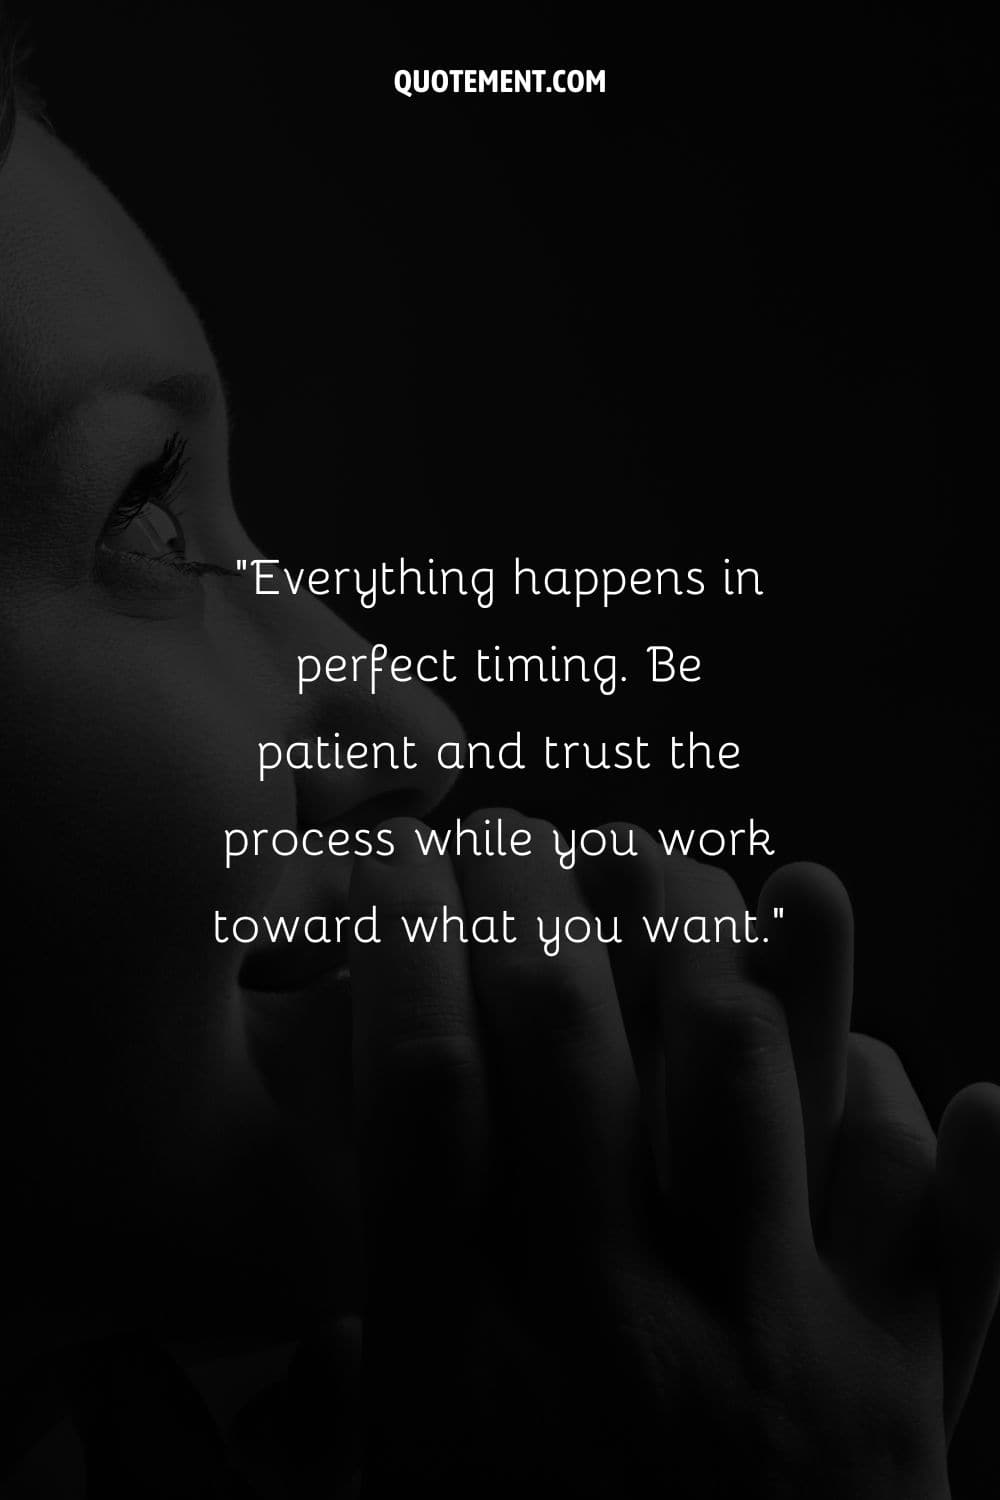 Image of a woman in prayer representing quote on perfect timing.